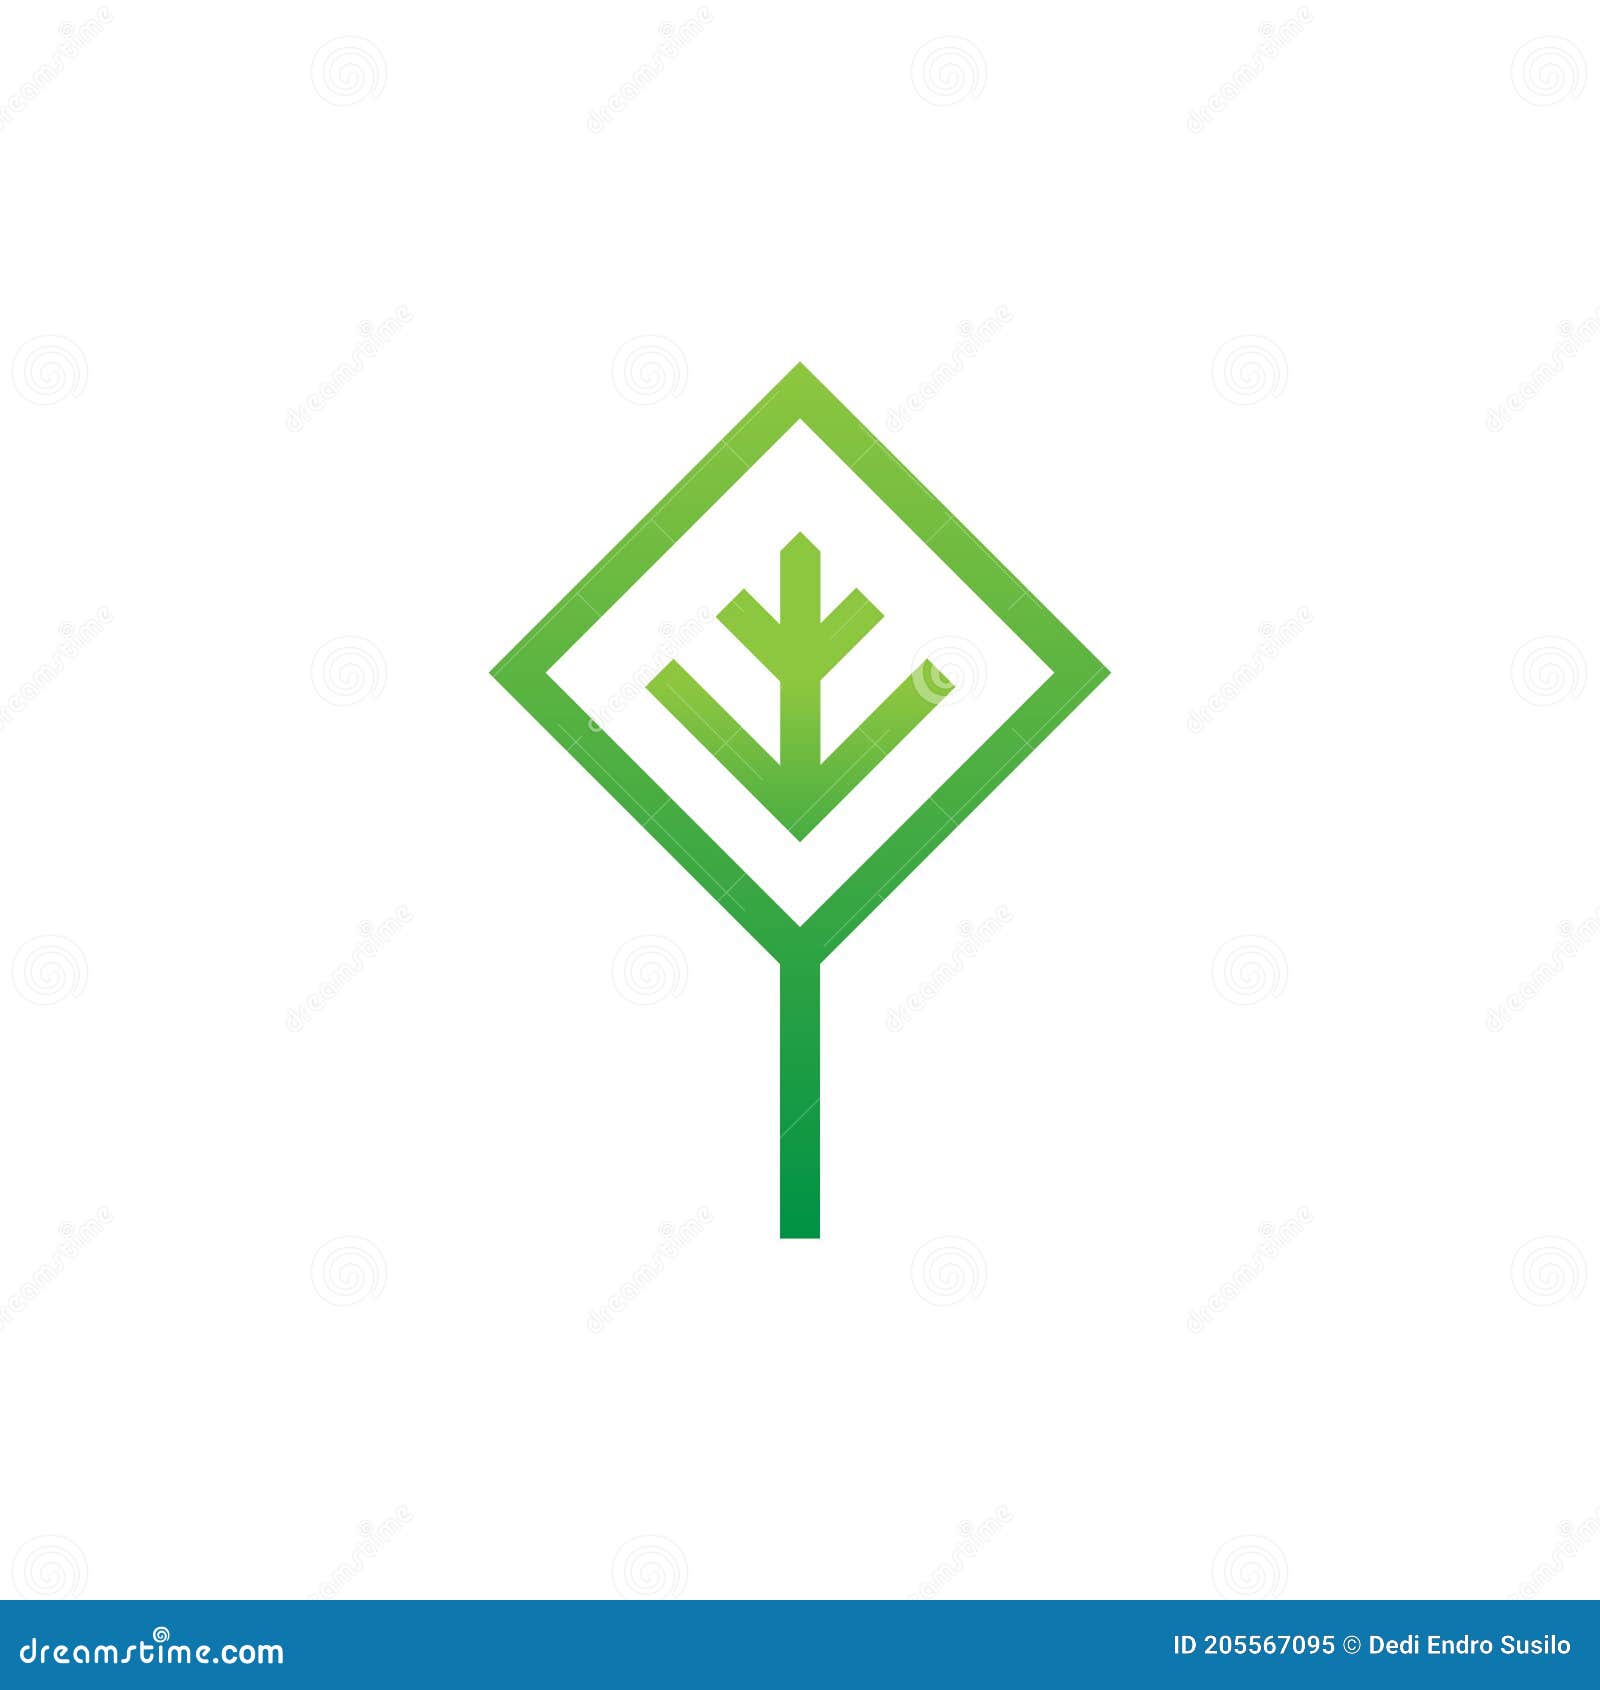 tree logo, describes a tree in the form of geometry